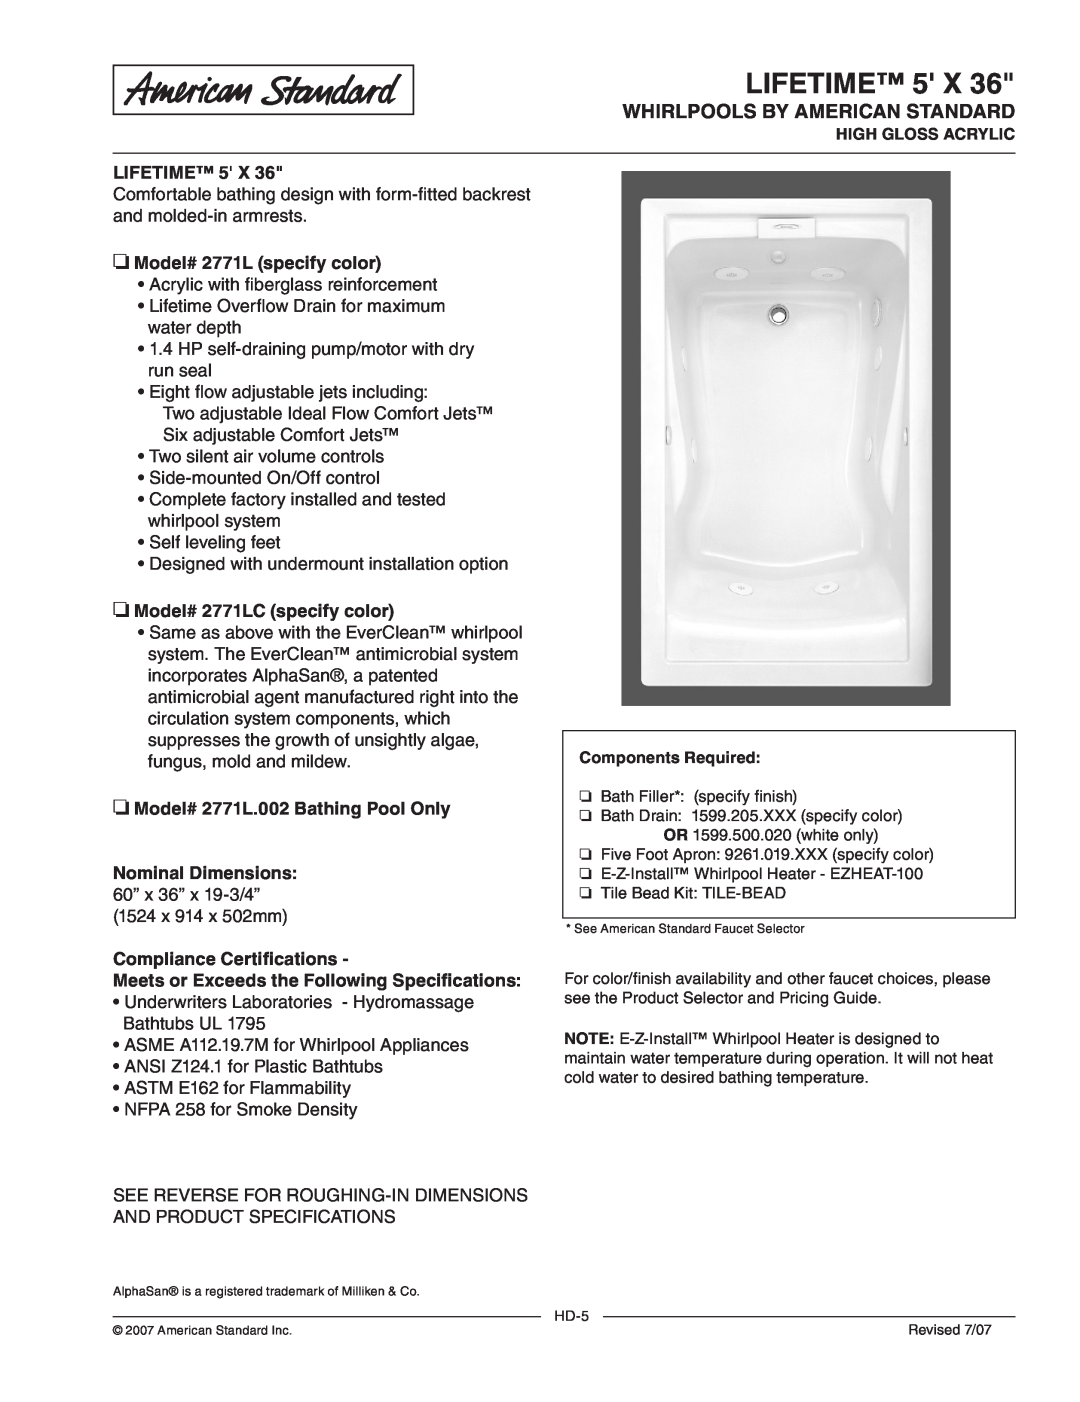 American Standard 2771L.002, 2771LC dimensions Lifetime, Whirlpools By American Standard, Model# 2771L specify color 